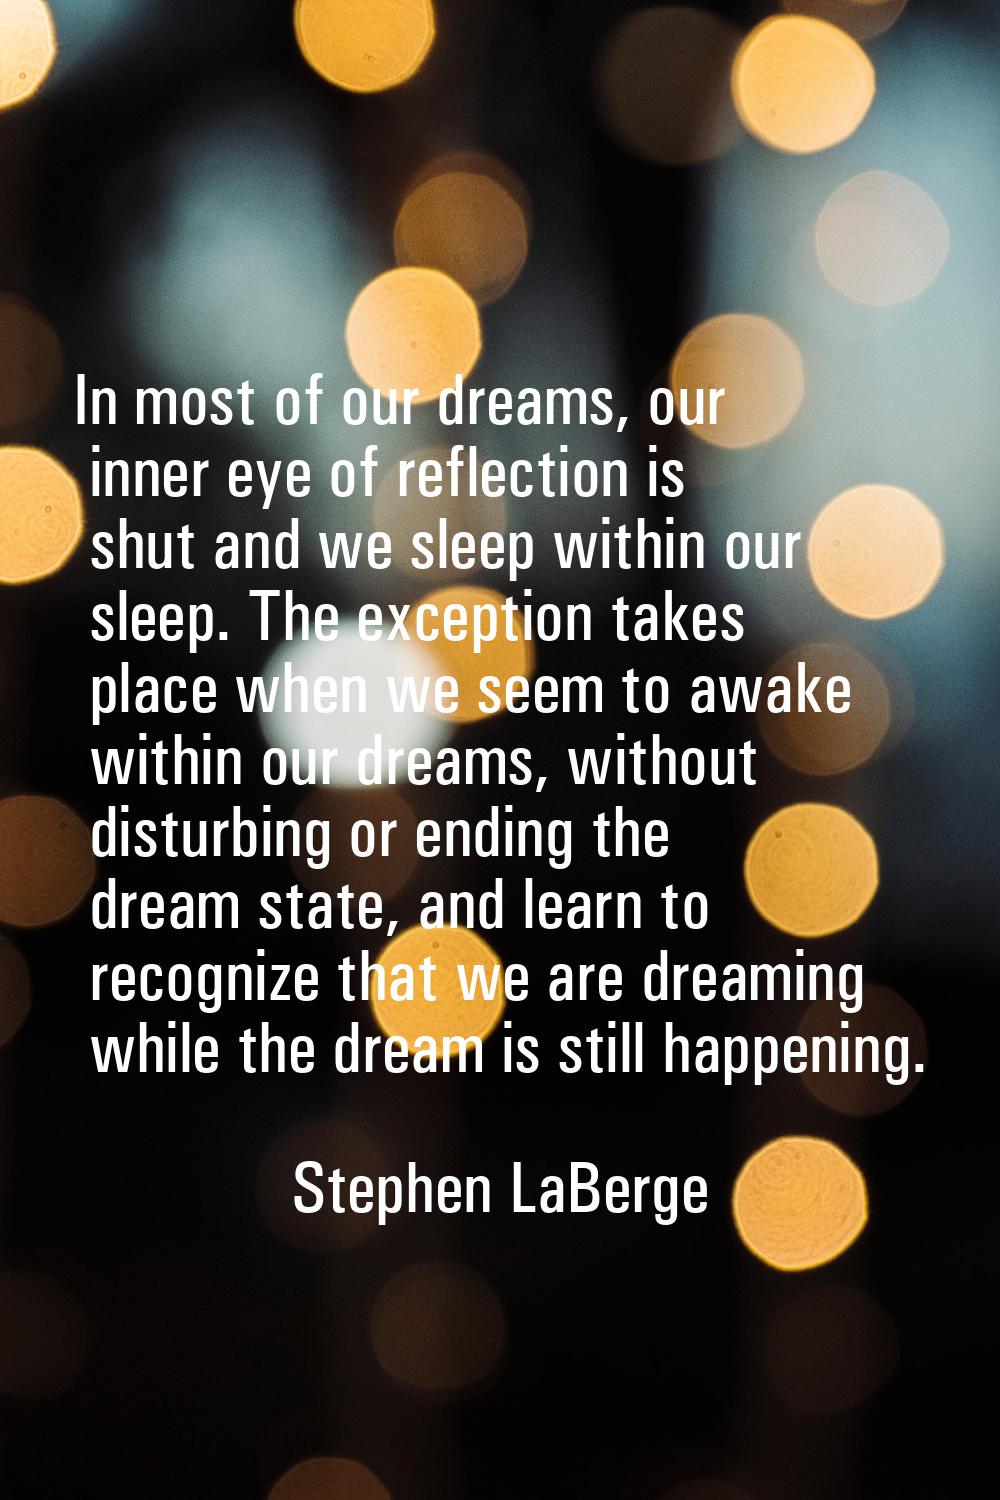 In most of our dreams, our inner eye of reflection is shut and we sleep within our sleep. The excep